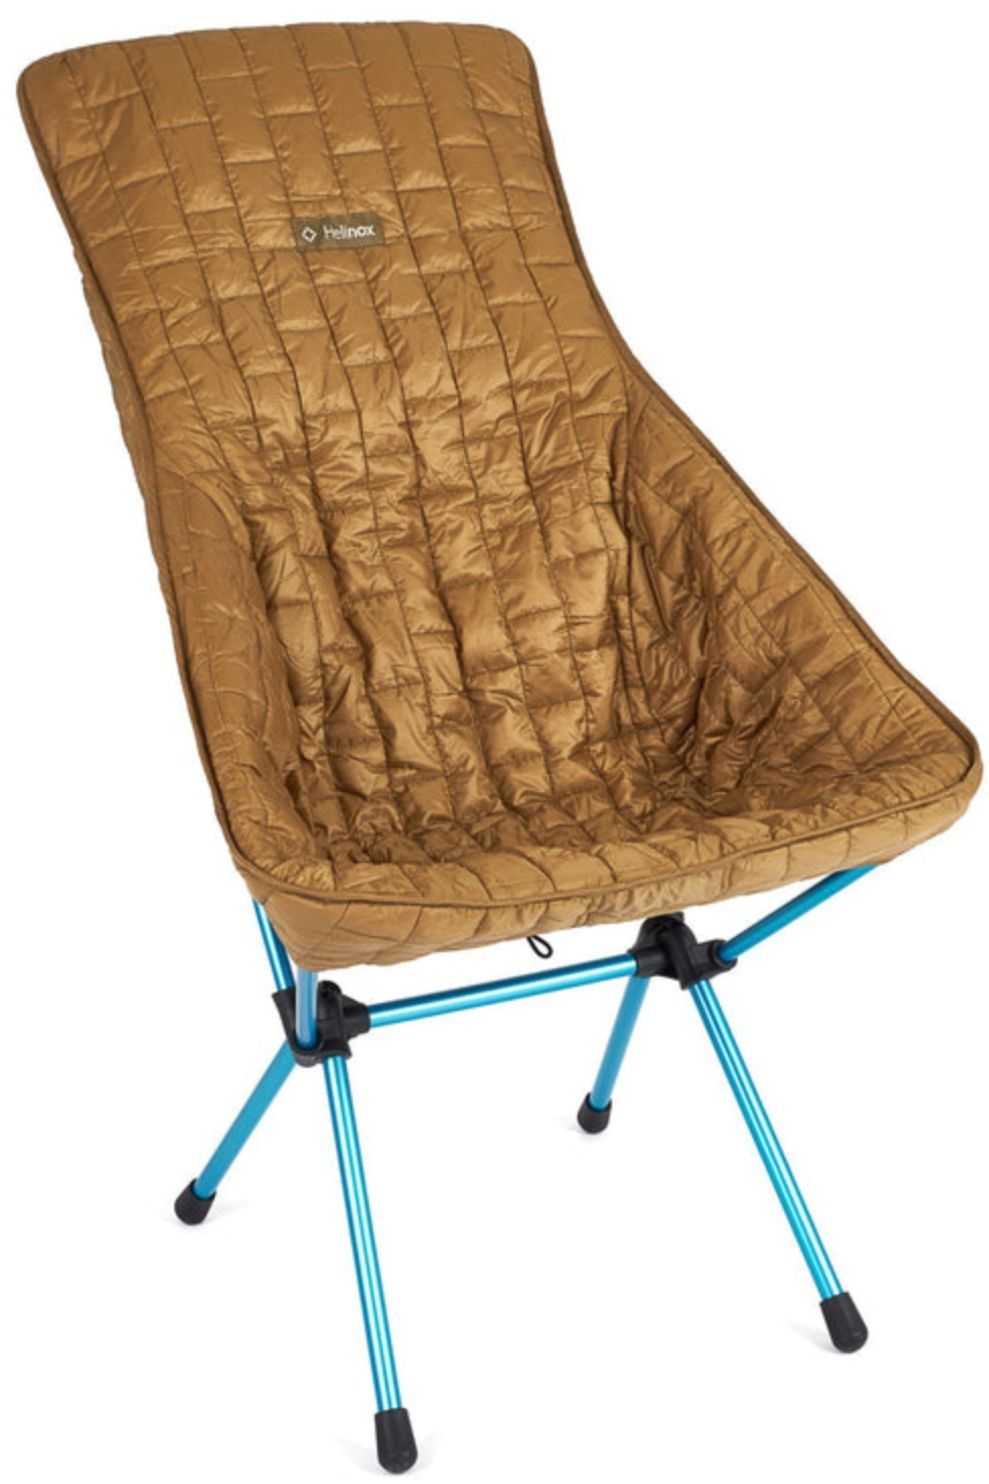 Helinox_Quilted Seat Warmer For Sunset And Beach Chair_A.S.Adventure_€79,95